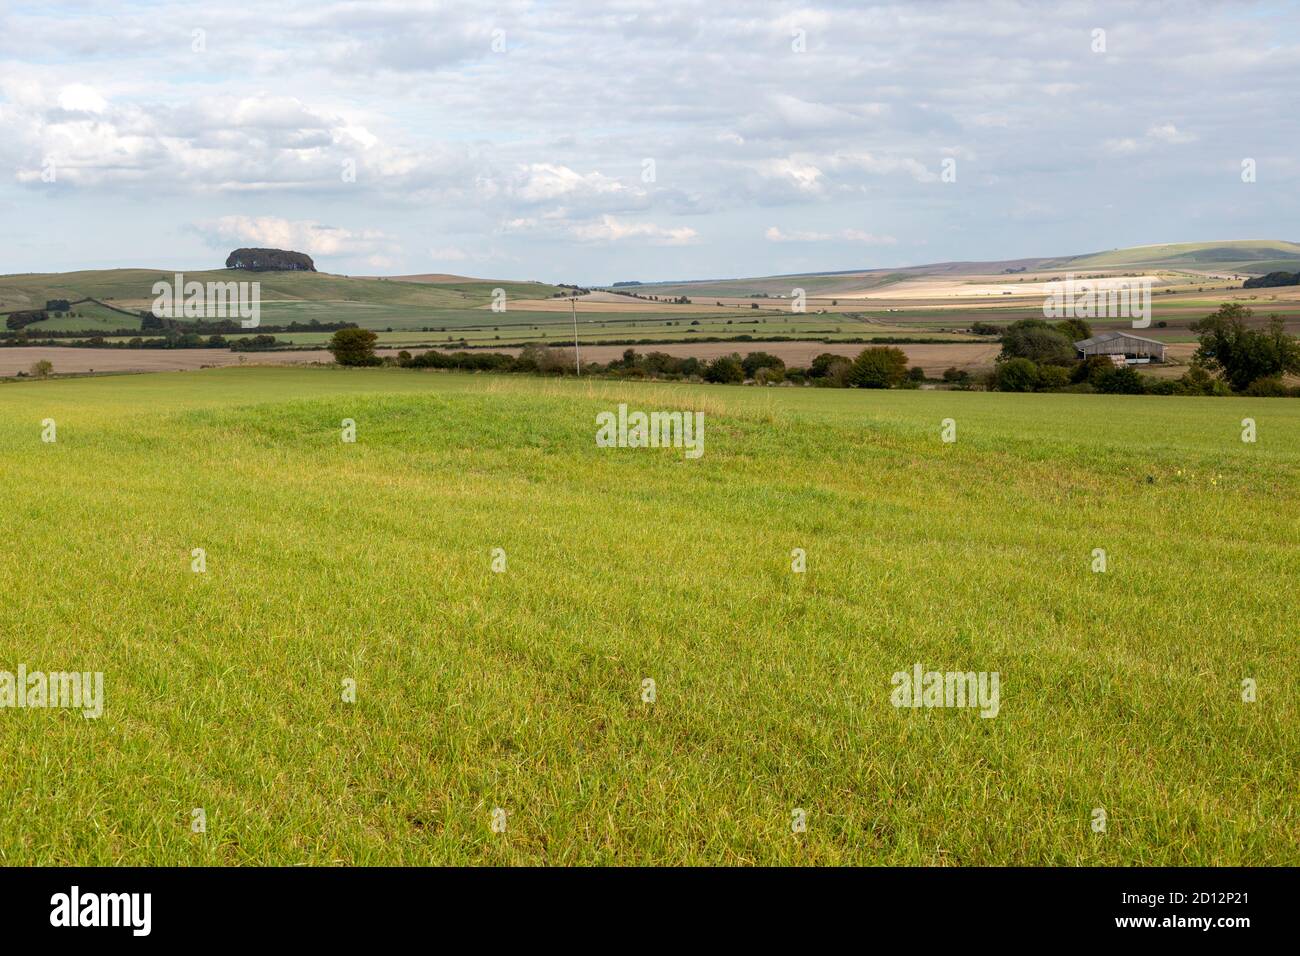 Remains of King's Play Hill neolithic Long Barrow in field near Heddington, England, UK chalk landscape North Wessex Downs AONB Stock Photo